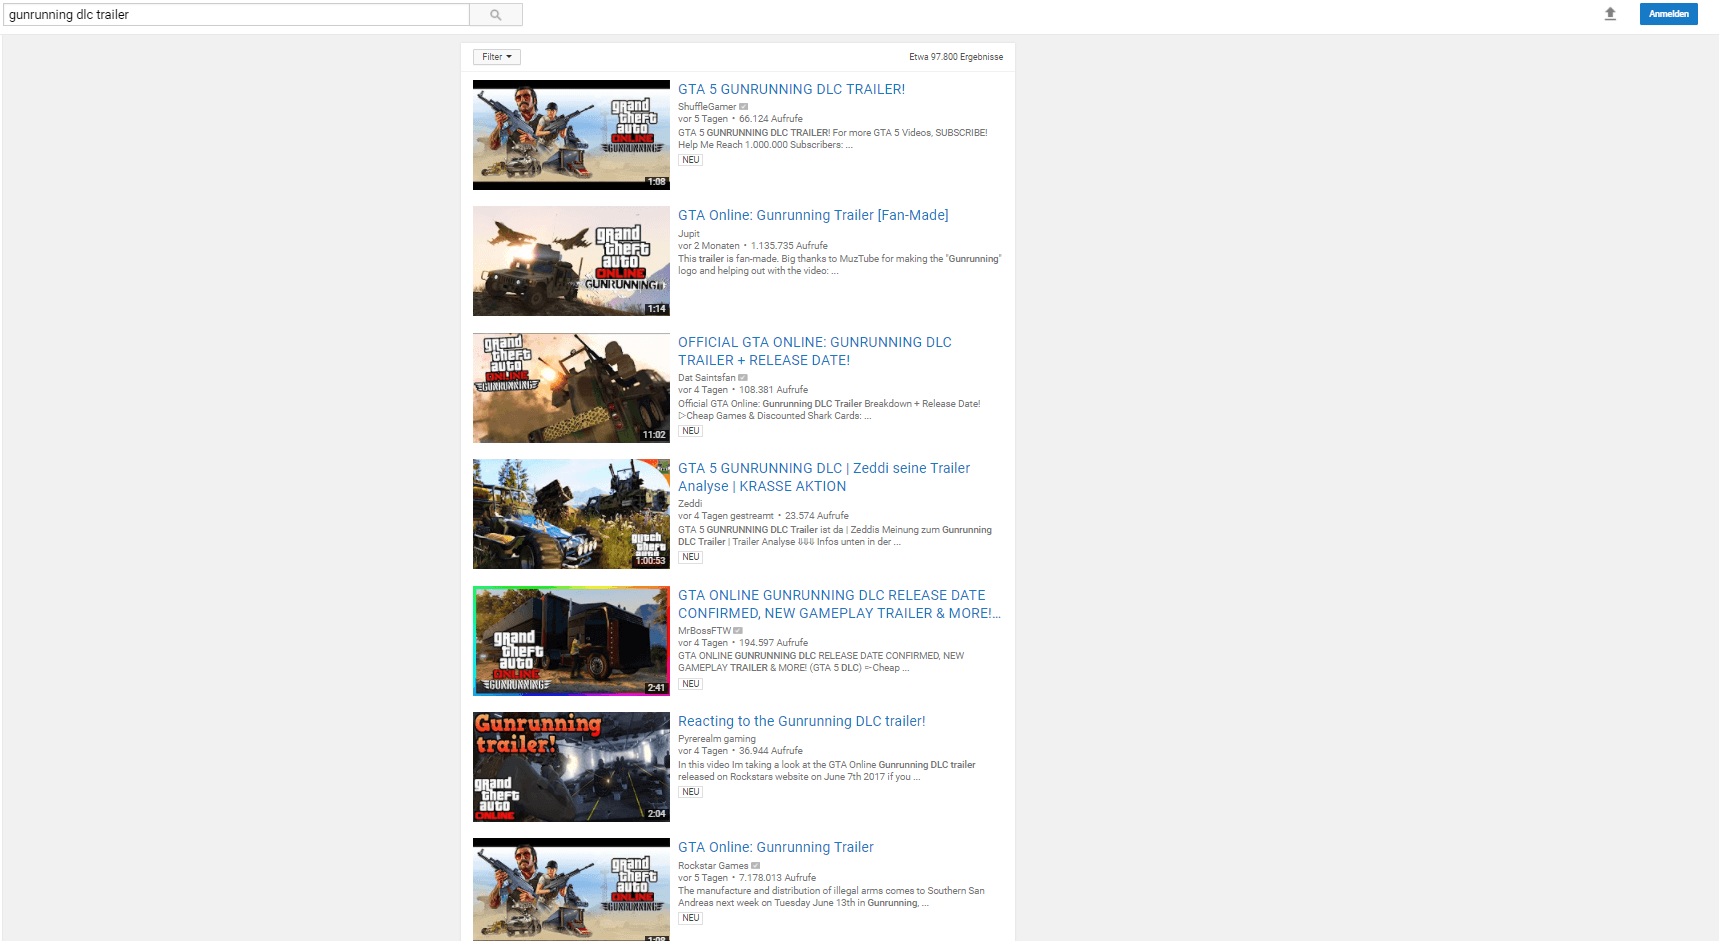 Only GTA V Logo - When searching for the new DLC trailer the R video only shows up as